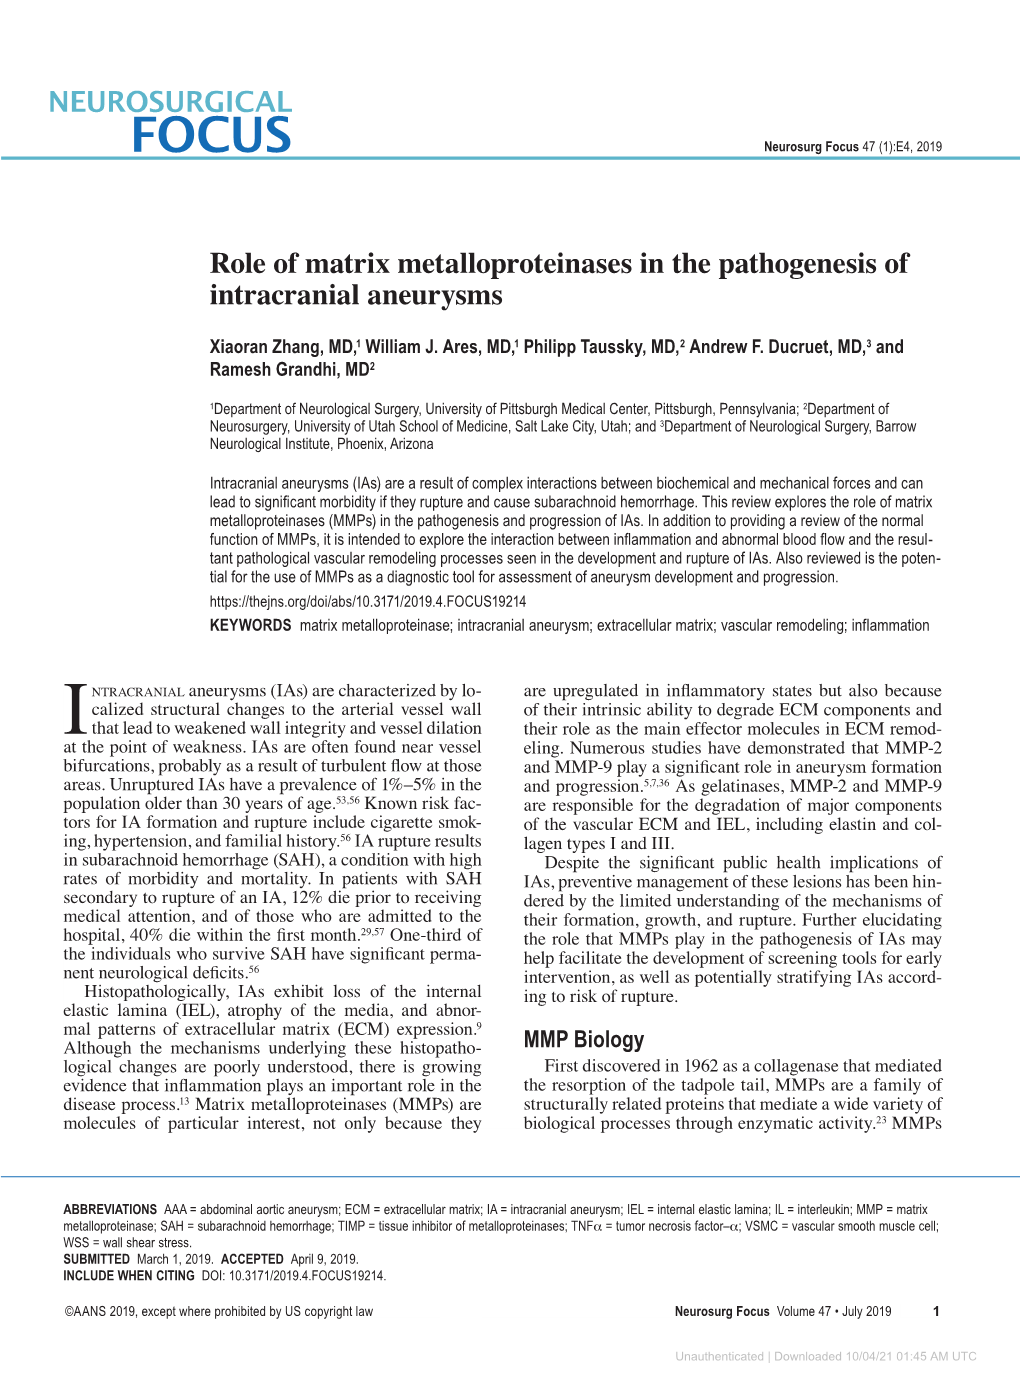 Role of Matrix Metalloproteinases in the Pathogenesis of Intracranial Aneurysms